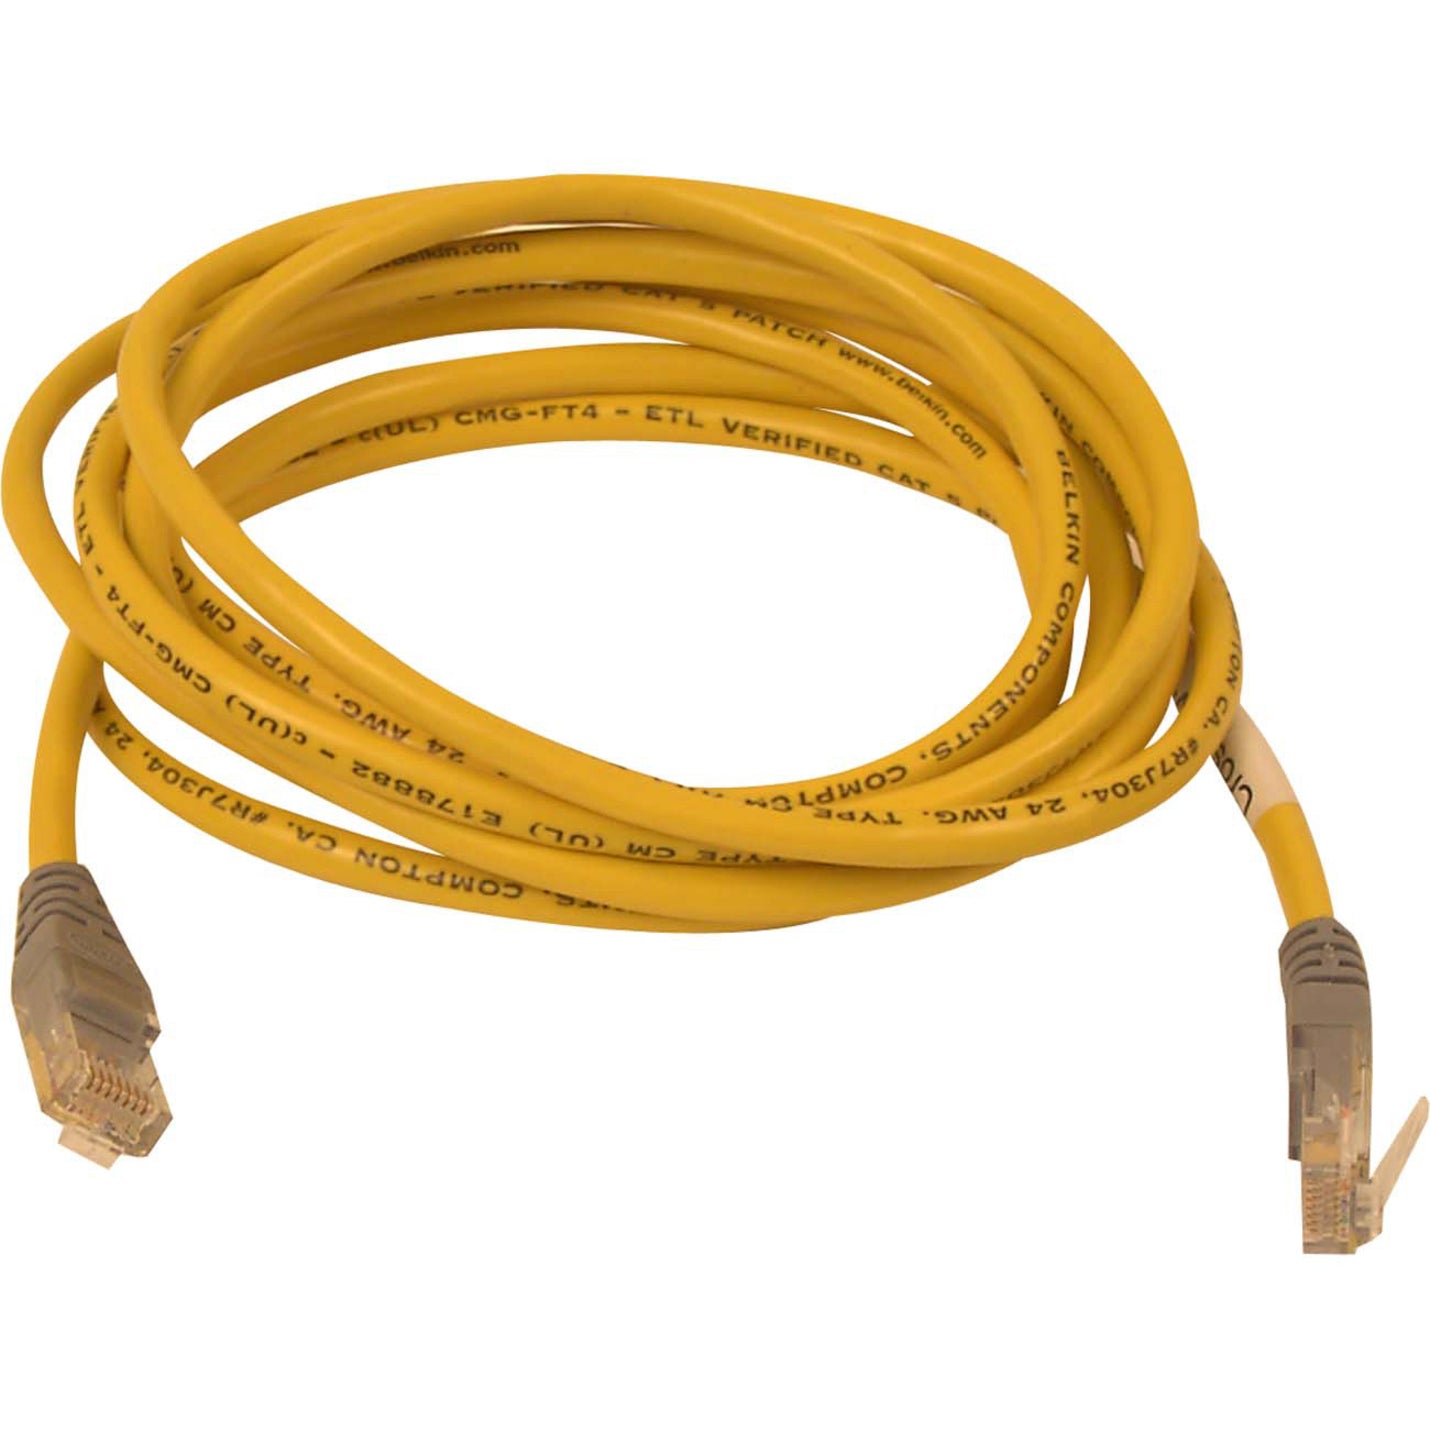 Belkin A3X126-07-YLW-M Cat5e Crossover Cable, 7 ft, Yellow, Lifetime Warranty